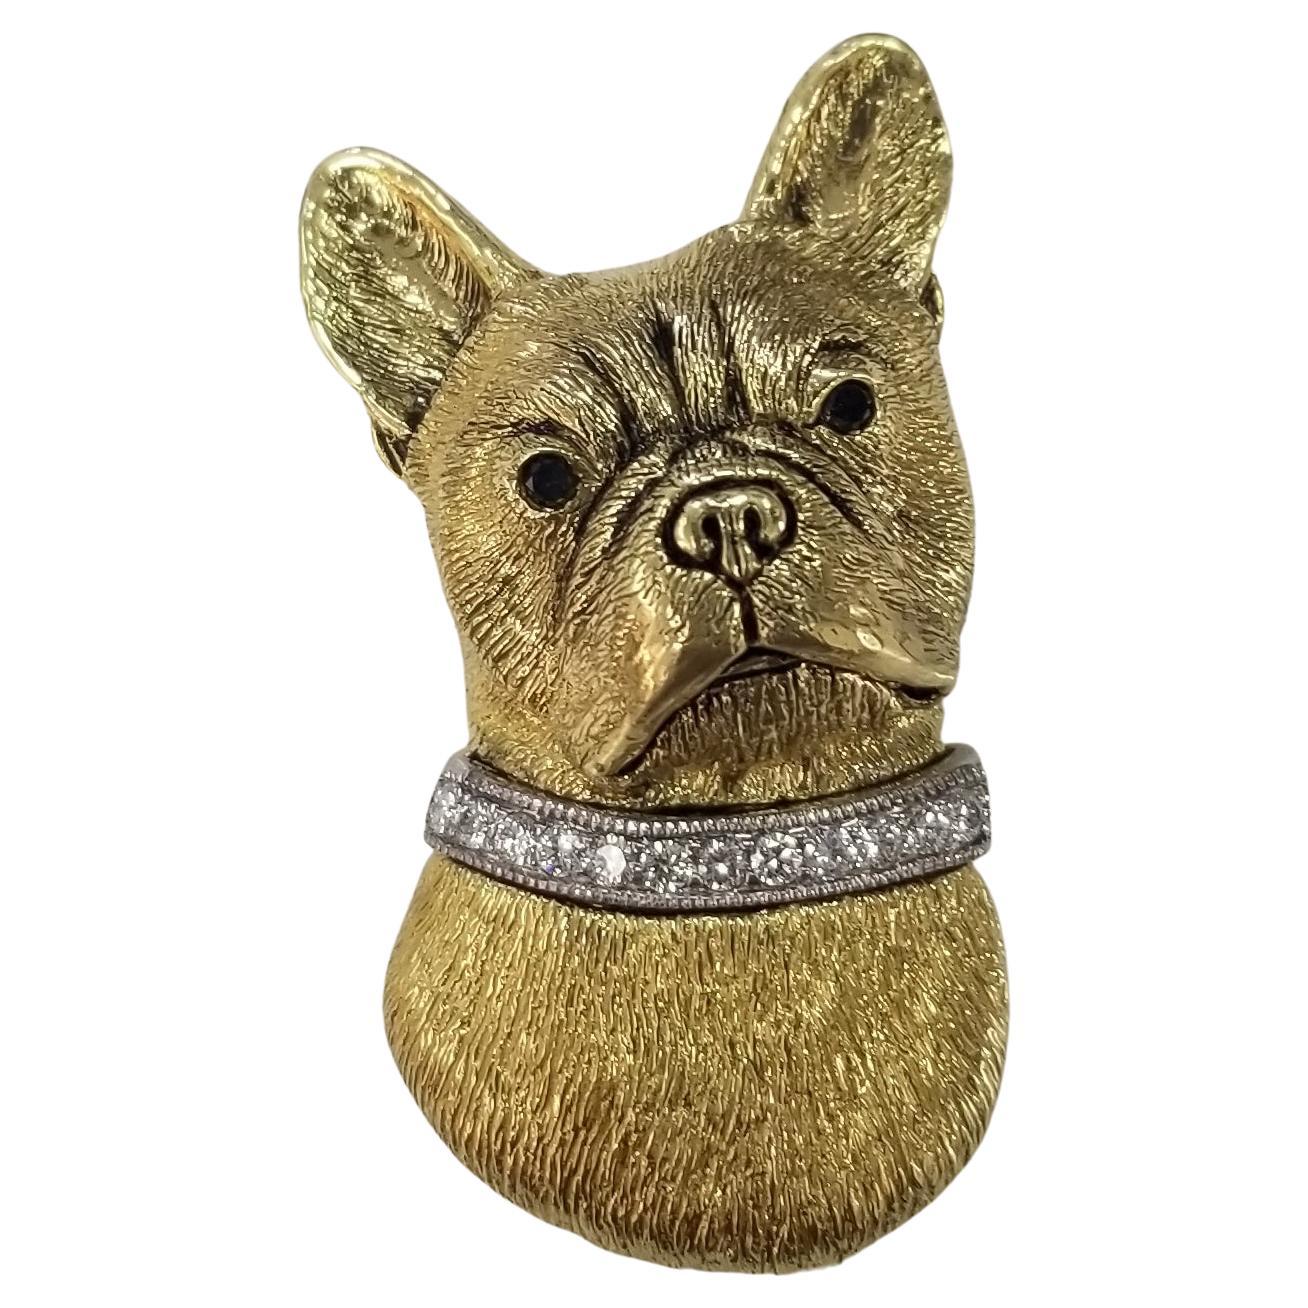 Madleine Kay 18k Yellow Gold "French Bull Dog" Head Paved in Diamonds with Black For Sale